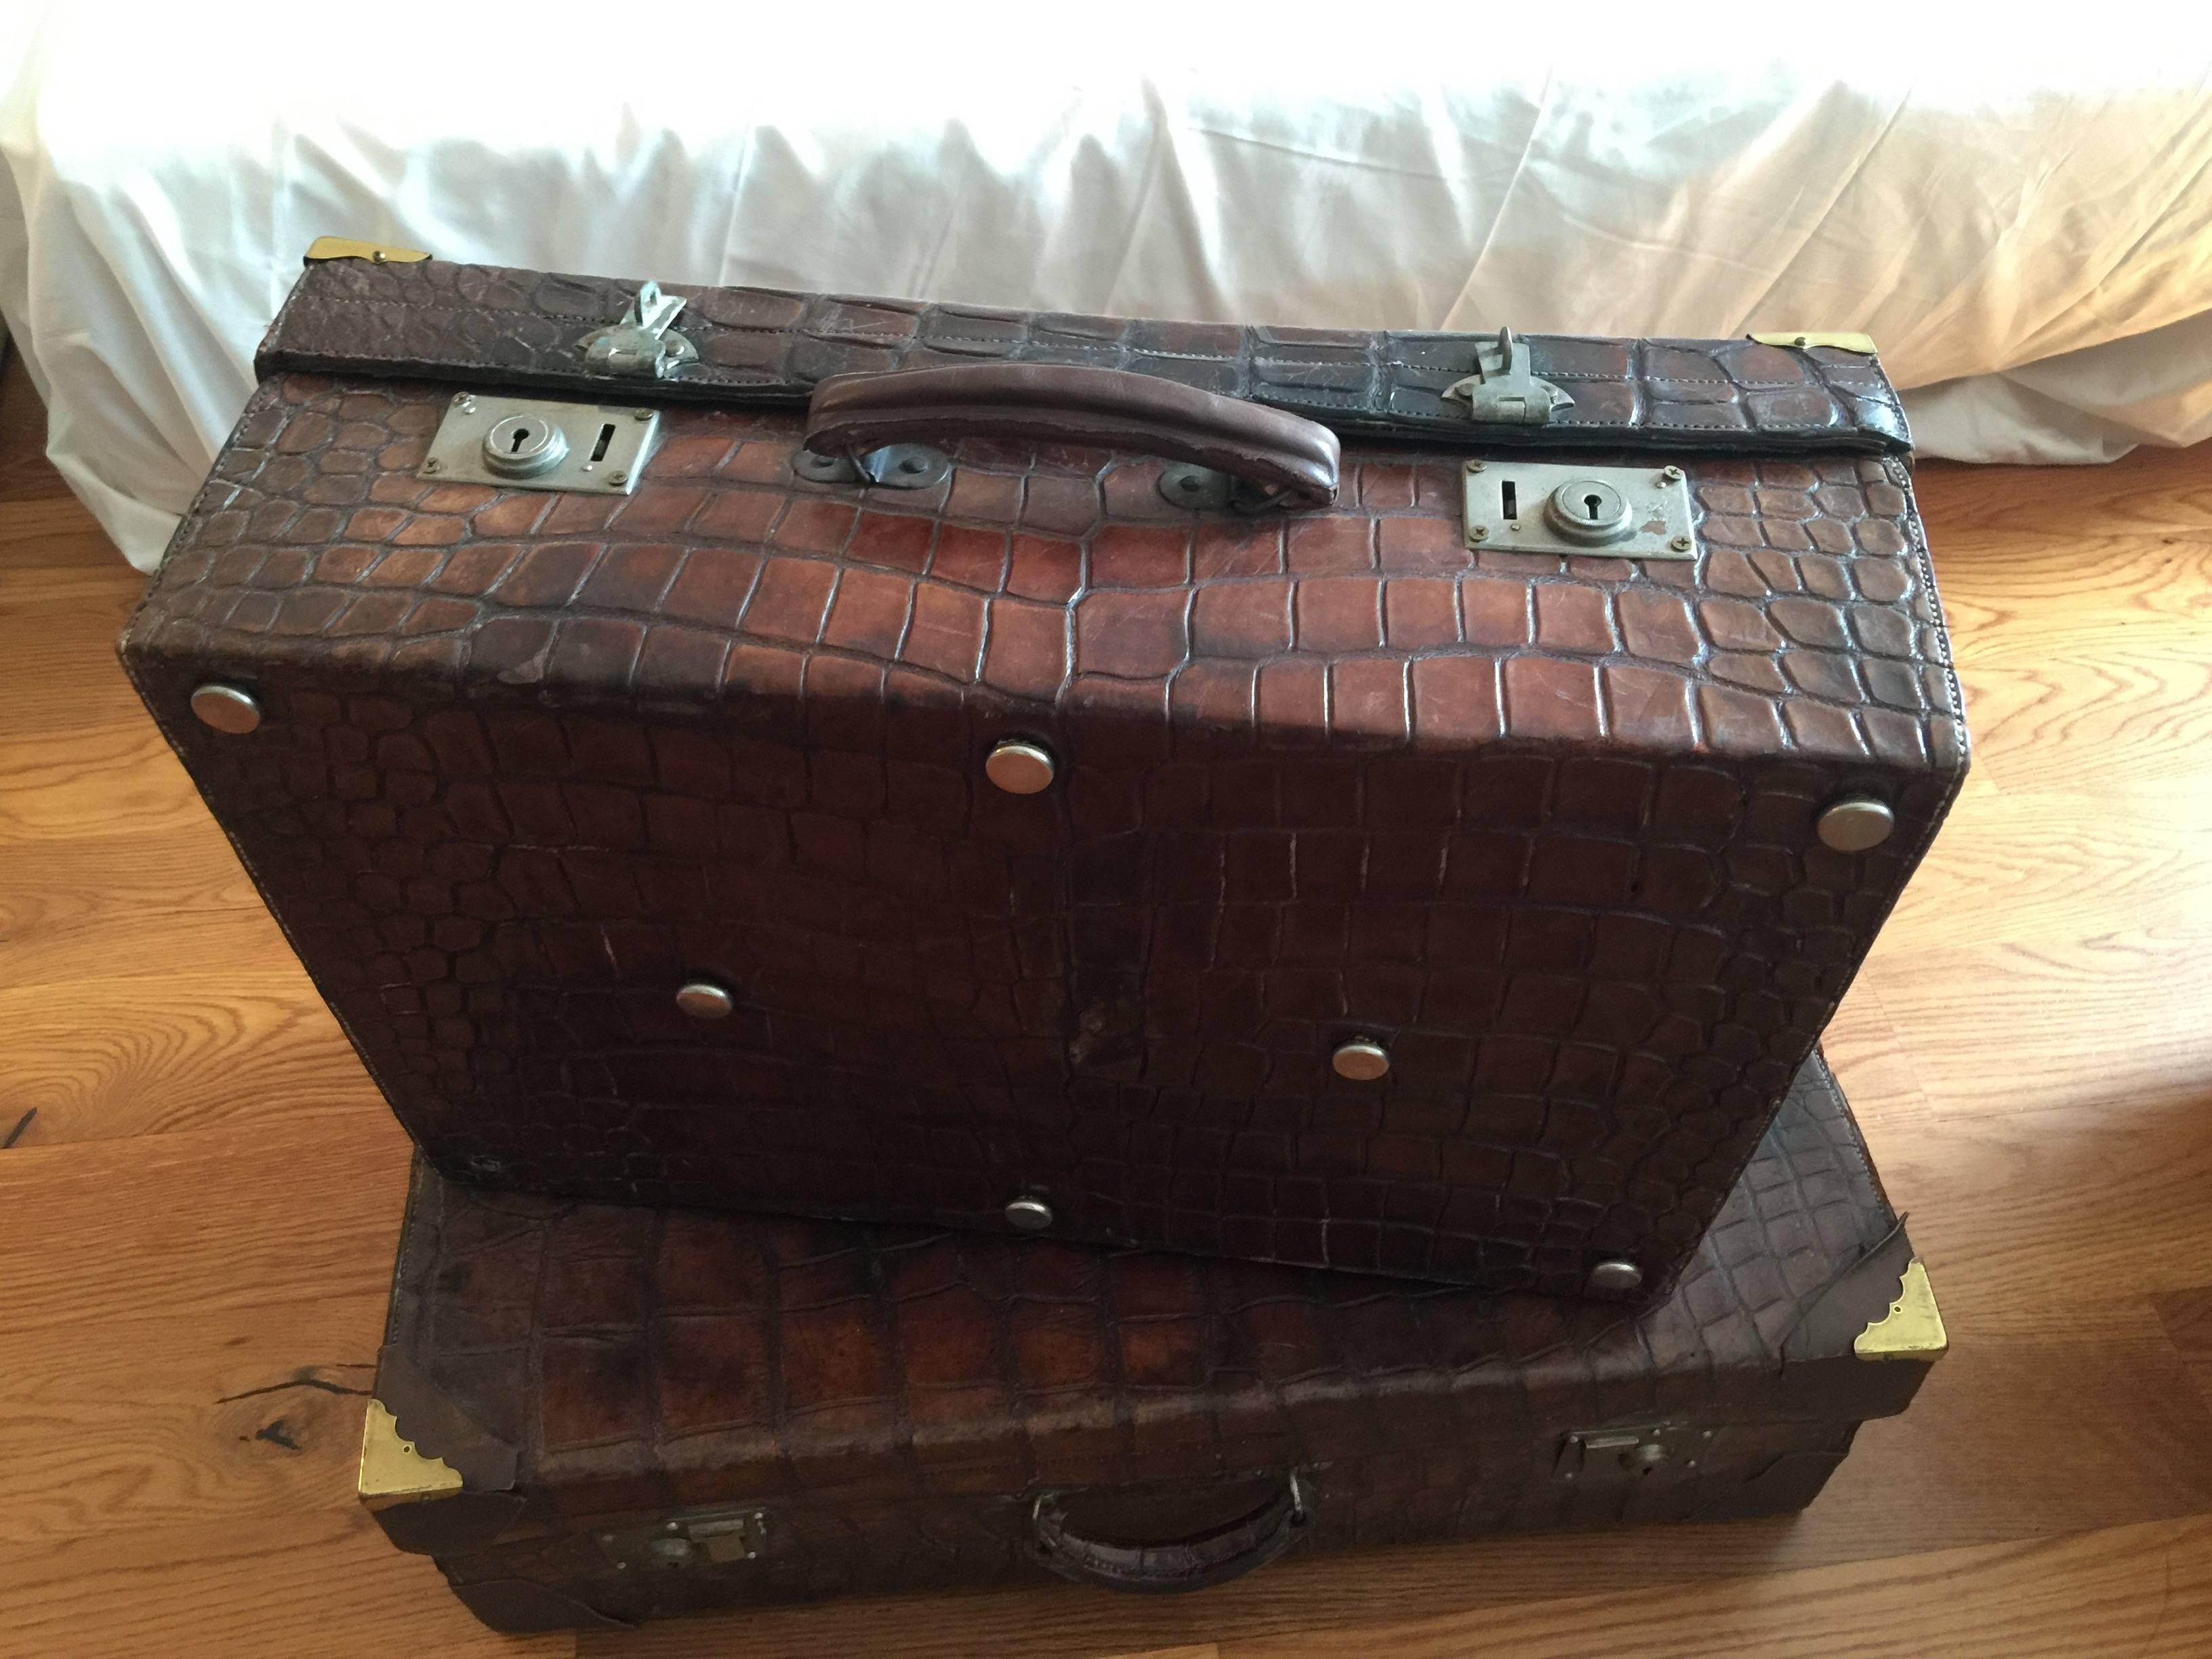 Untouched and beautiful vintage crocodile luggage’s, one larger and one smaller, from the circa 1930s. The two luggages are always kept intact without any restoration or refurbishing with visible sign of normal wear which contributes to make them